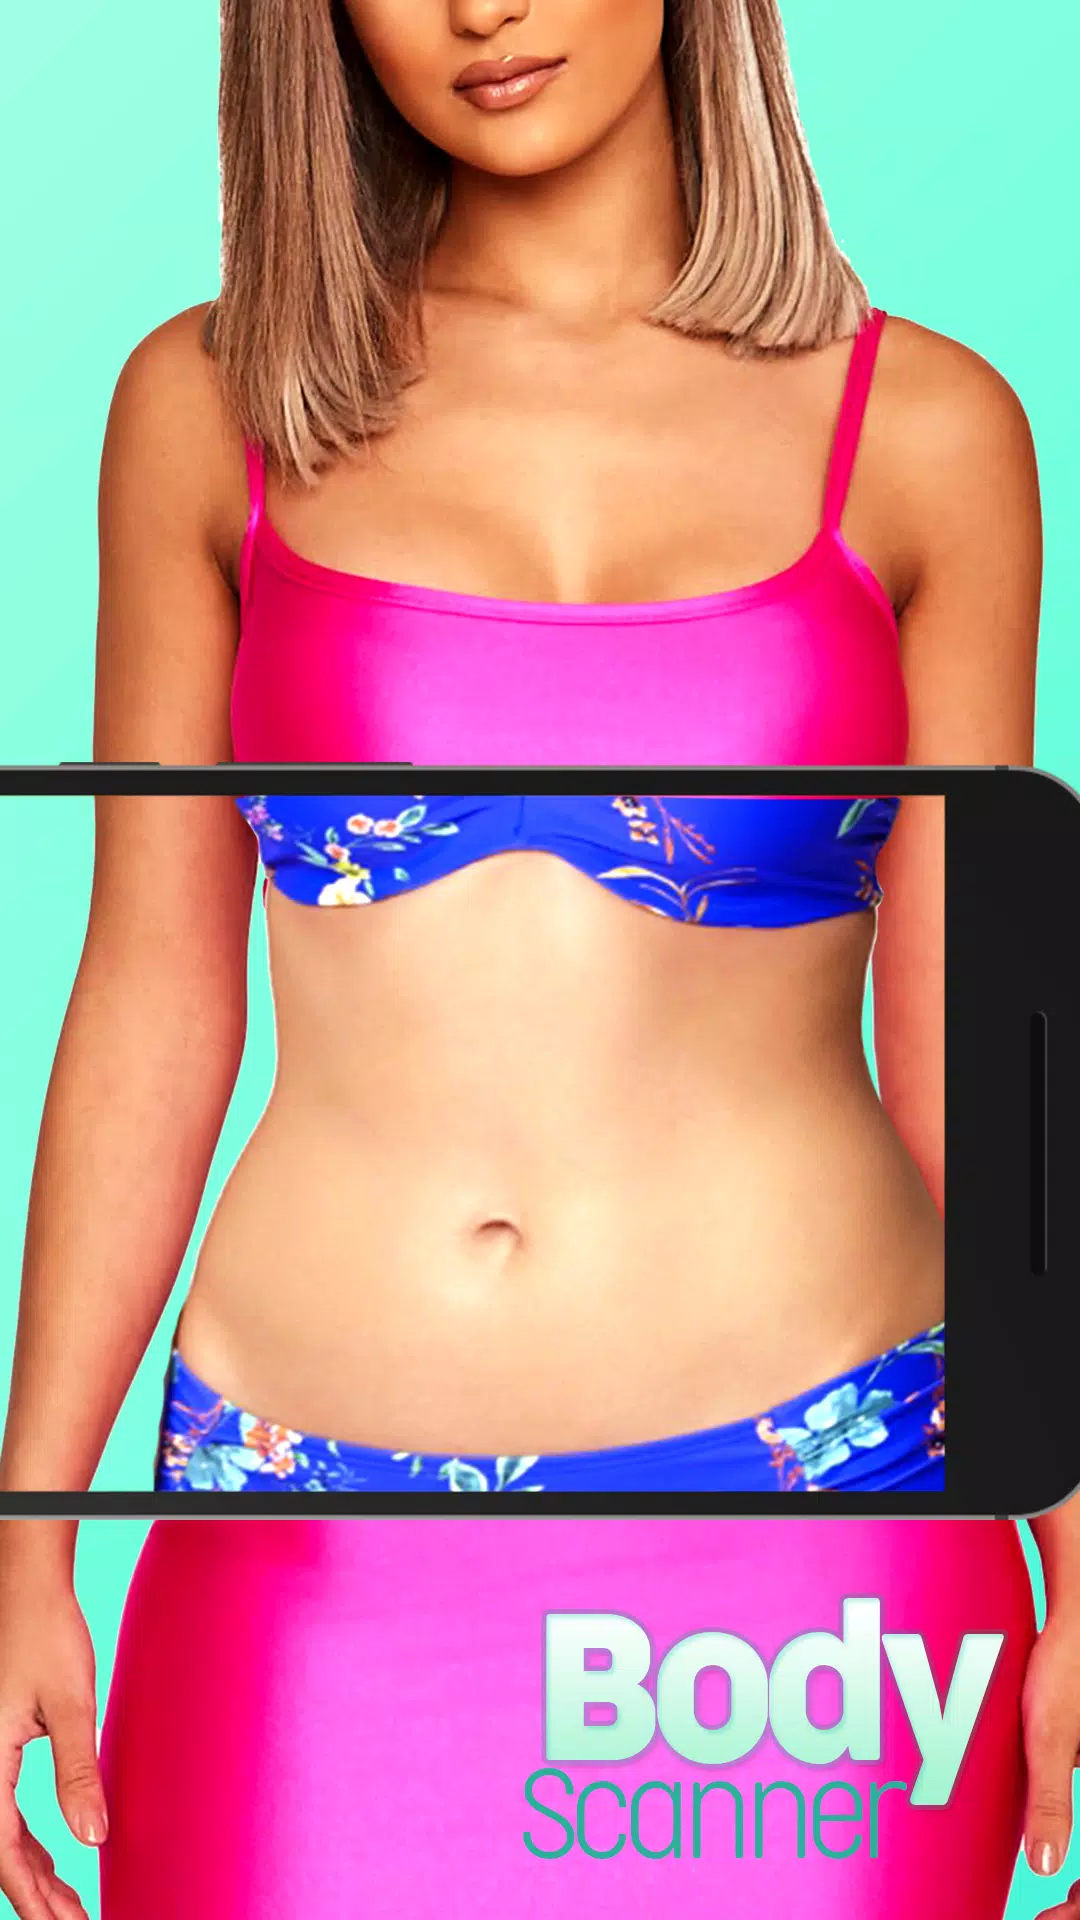 Sexy body scanner photo editor prank 18+ for Android - APK Download